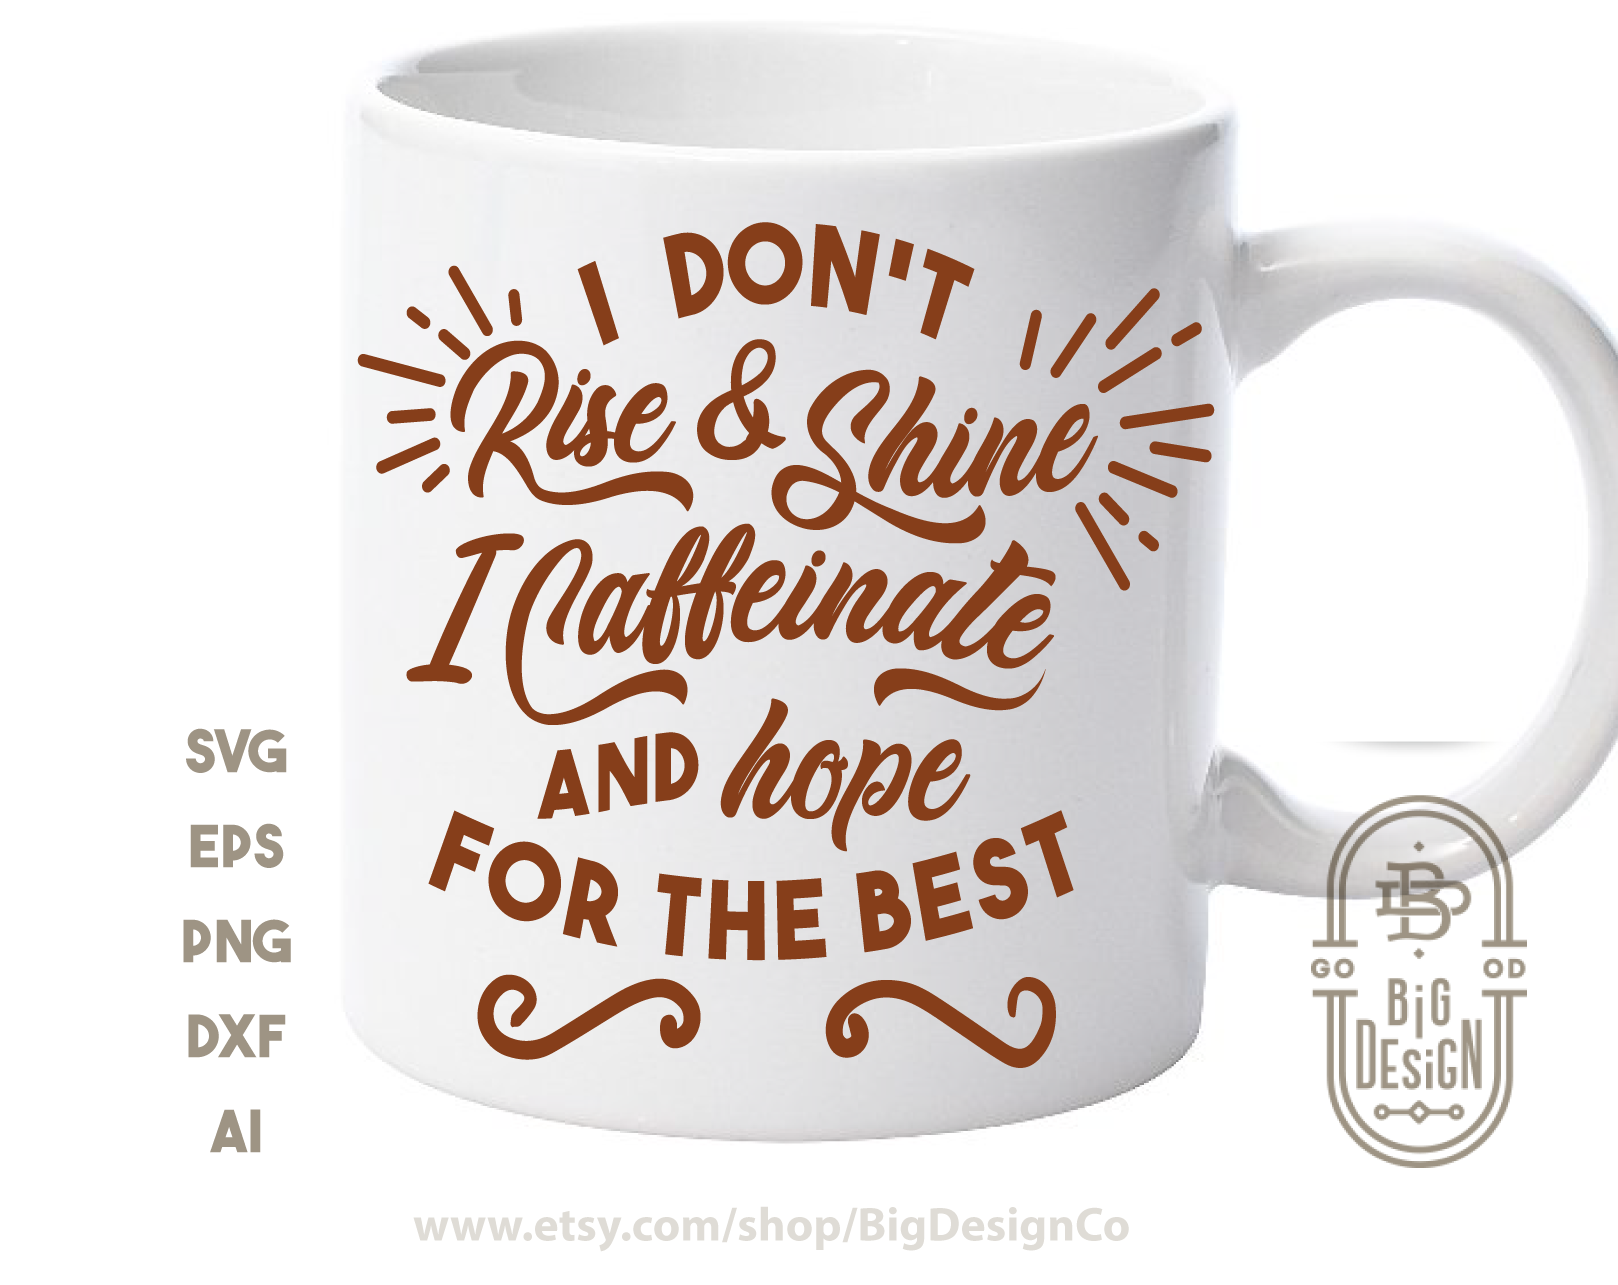 Coffee Svg I Don T Rise And Shine I Caffeinate And Hope For The Best Design Shopy